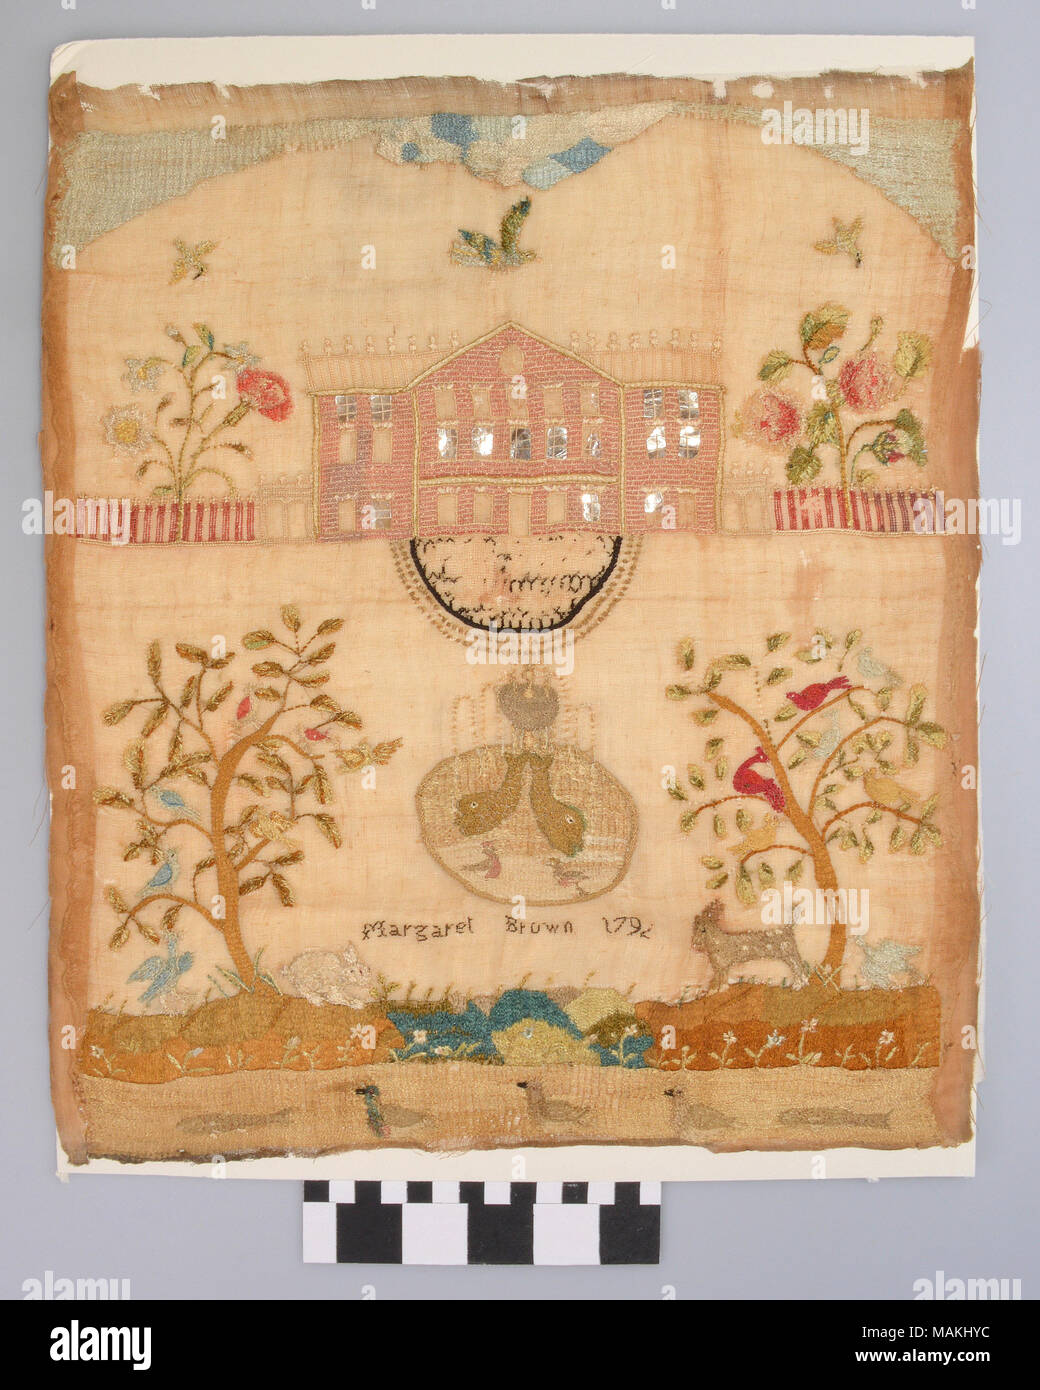 Elaborate embroidery with an image of a pink house and trees with various animals. Created by Margaret Brown in 1792. Margaret later married James Austin, a distant cousin to Moses Austin. Margaret and James moved to Missouri with other members of the Austin family after their marriage. Title: Embroidery of Margaret Brown  . 1792. Margaret Brown Stock Photo